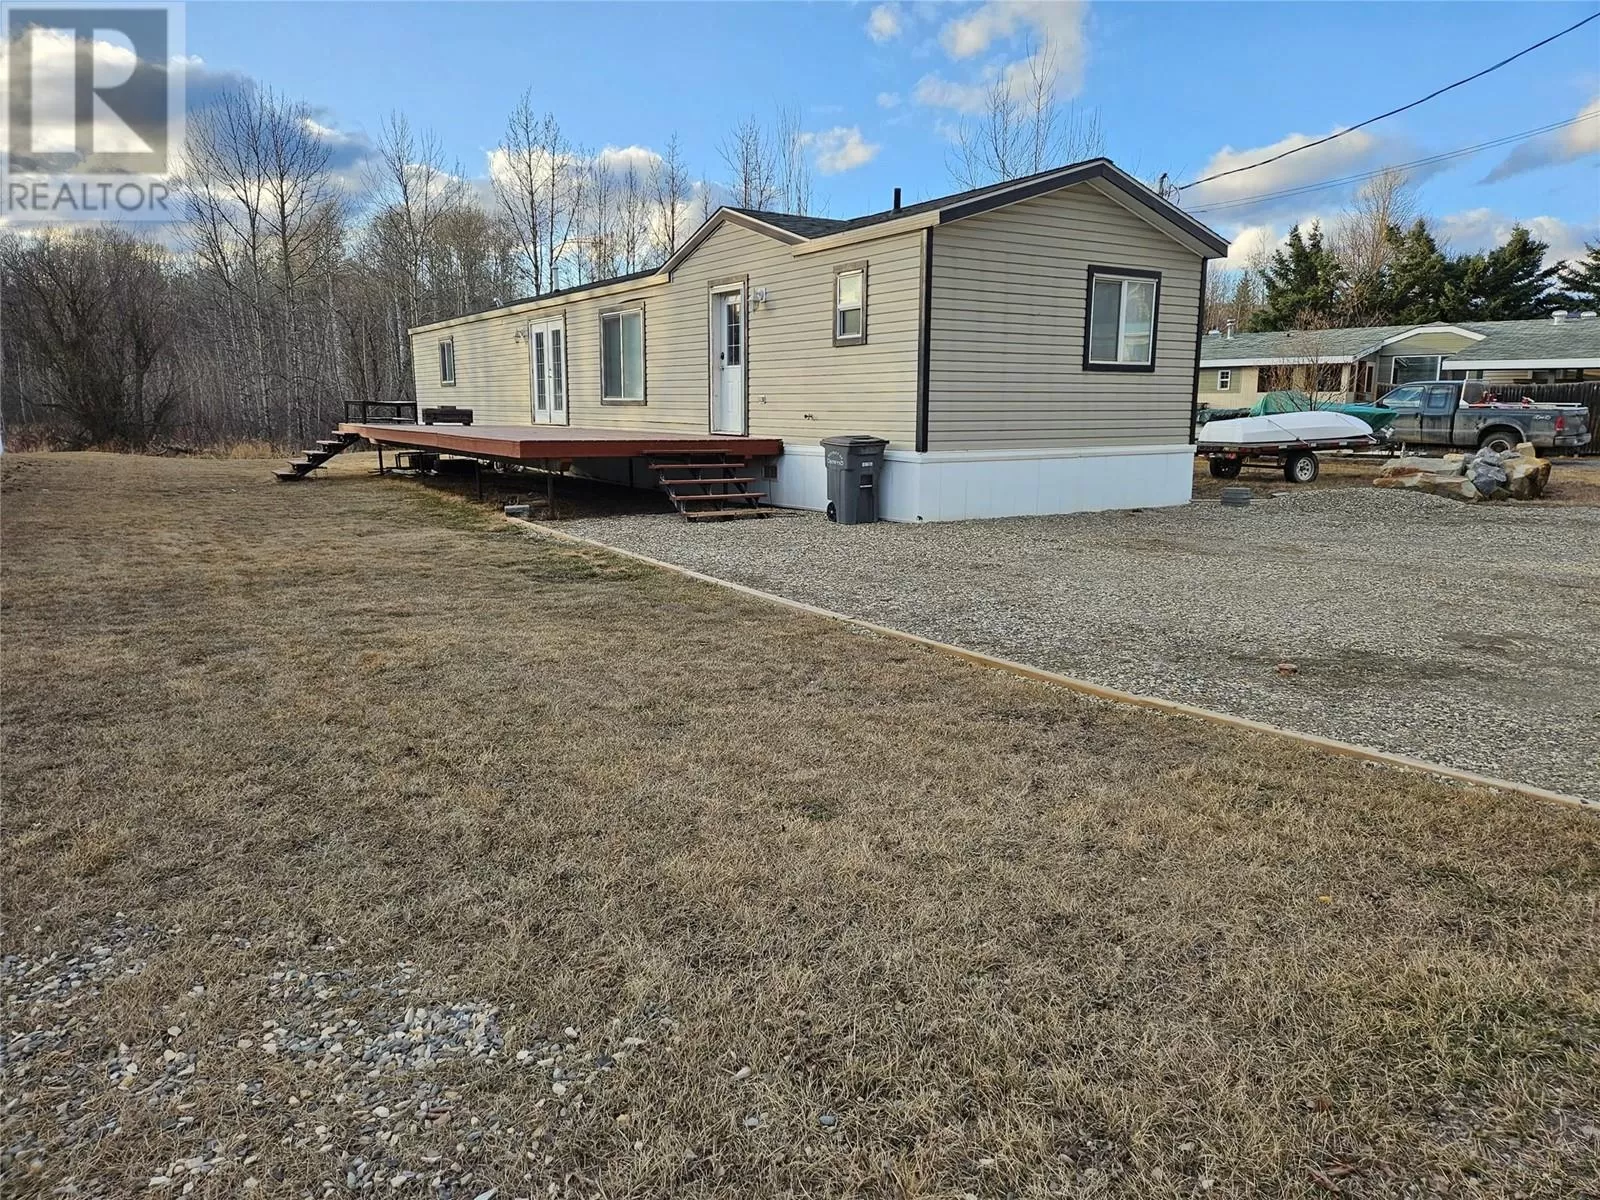 Manufactured Home for rent: 5241 45 Street Se, Chetwynd, British Columbia V0C 1J0